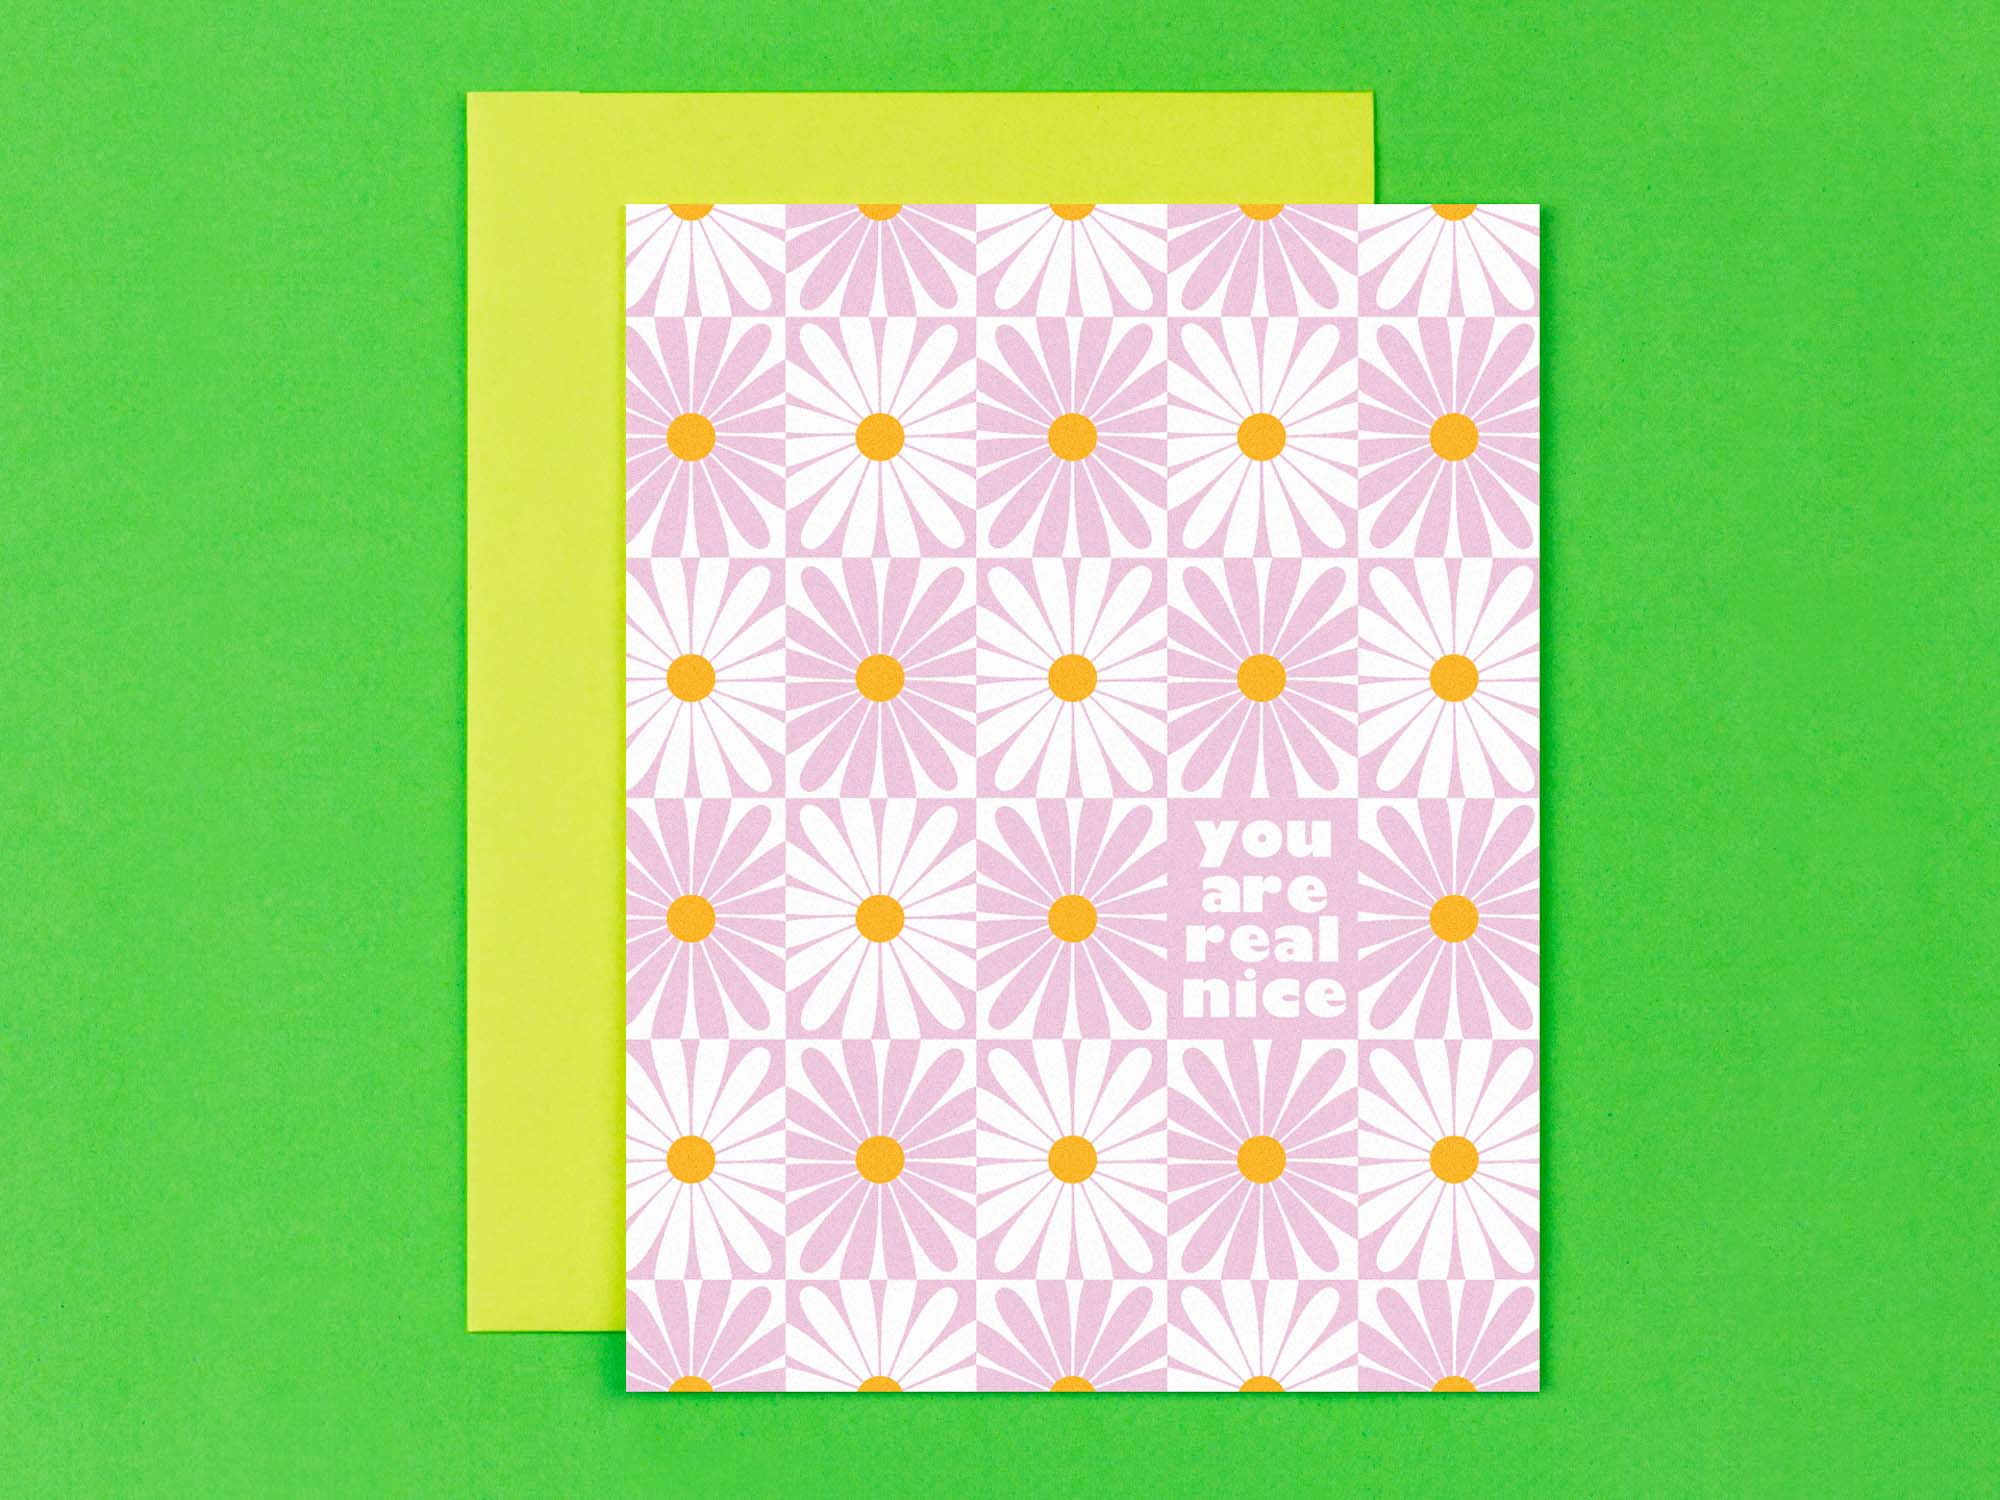 "You are real nice" vibrating checker daisy pattern thank you or friendship card. Vaguely op art inspired. Made in USA by My Darlin' @mydarlin_bk